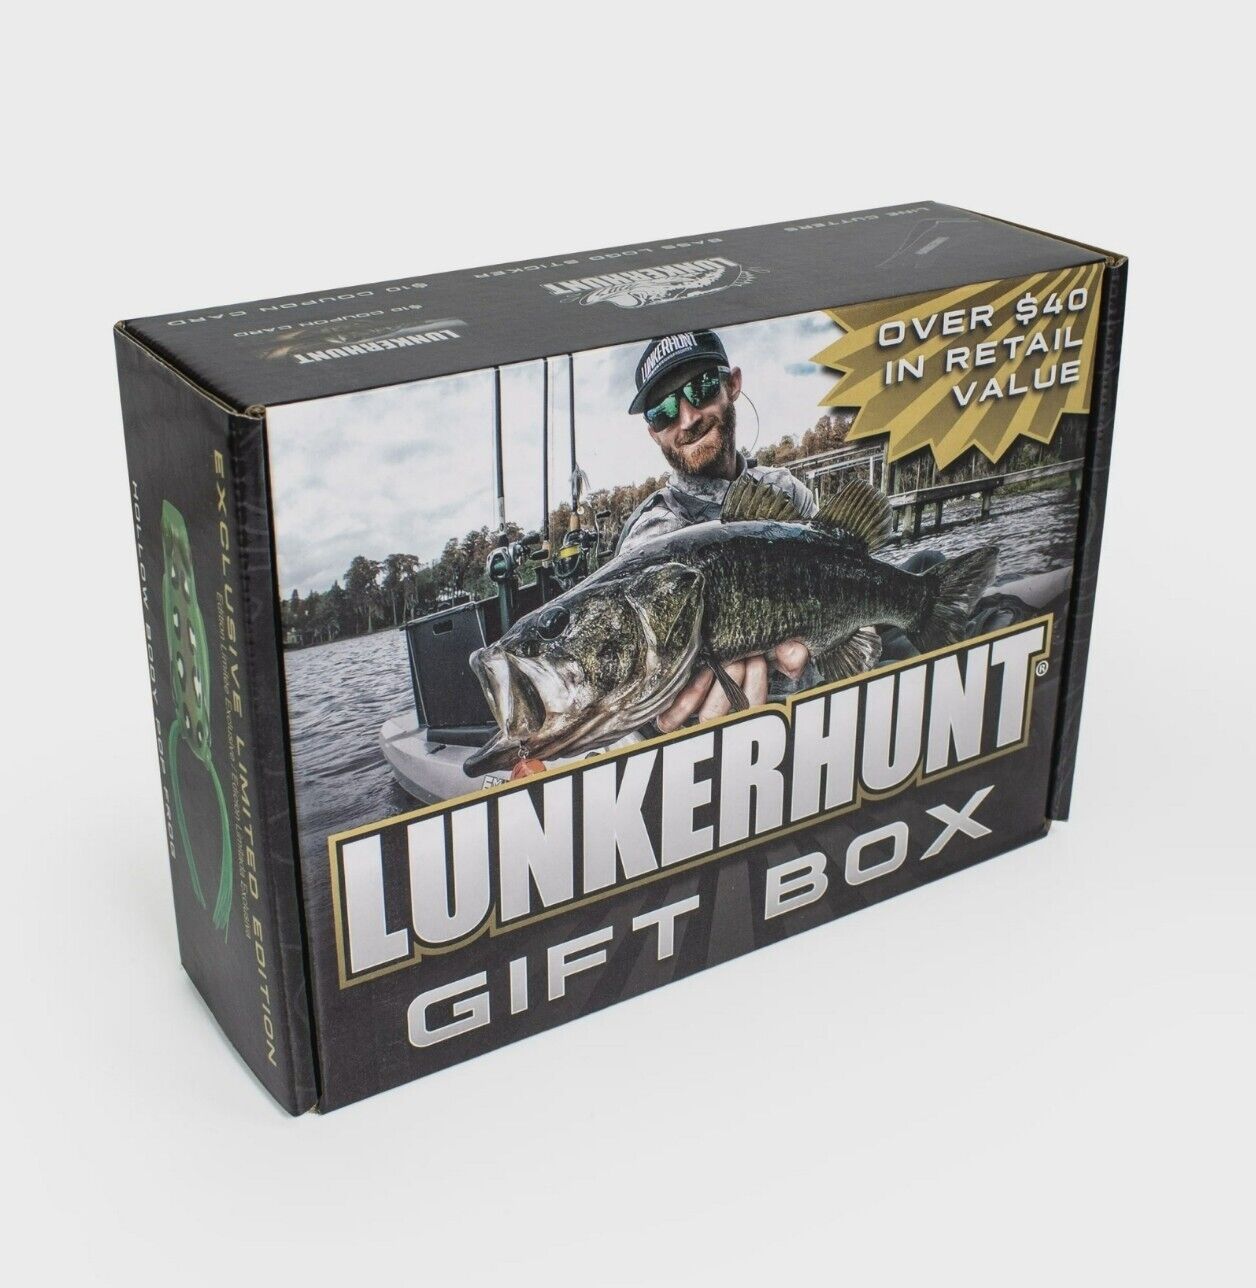 $40 Value Lunkerhunt 7 Piece Fishing Lure Gift Box With FREE 10$ Lunkerhunt Card